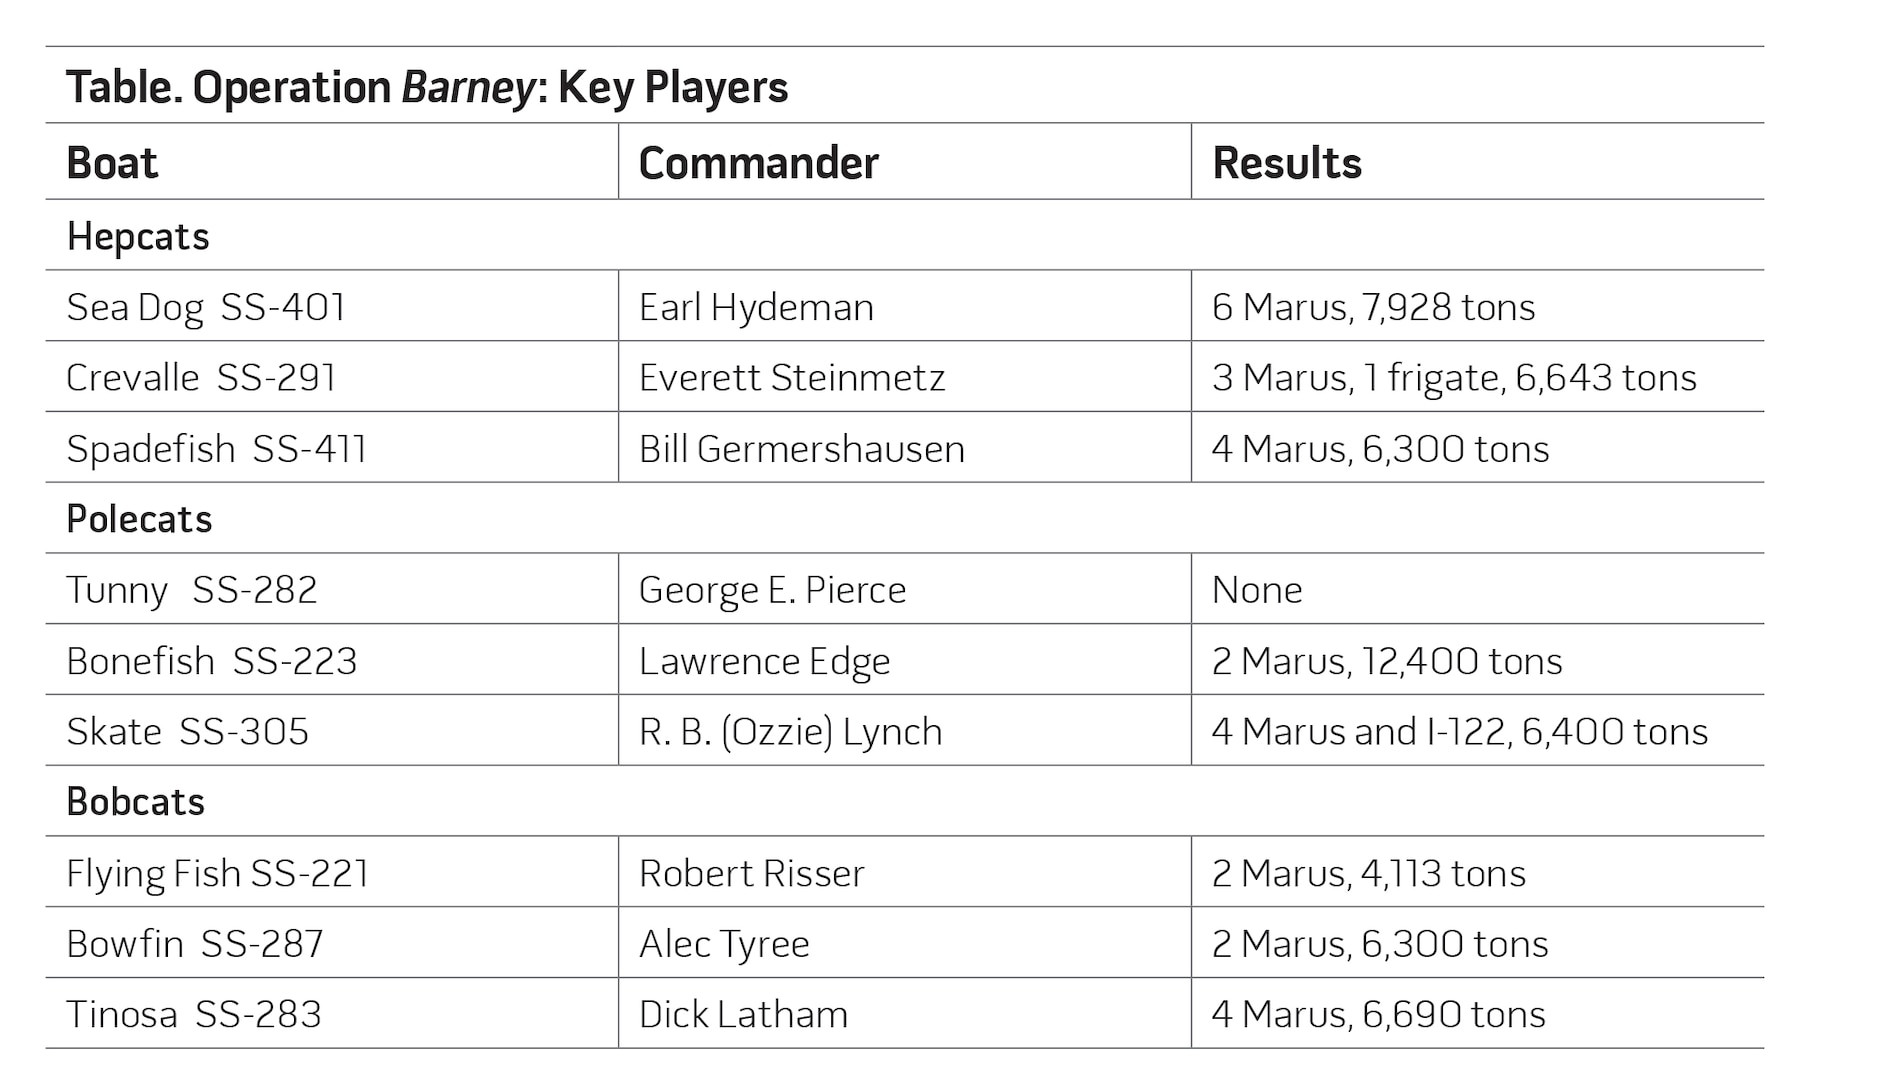 Table. Operation Barney: Key Players